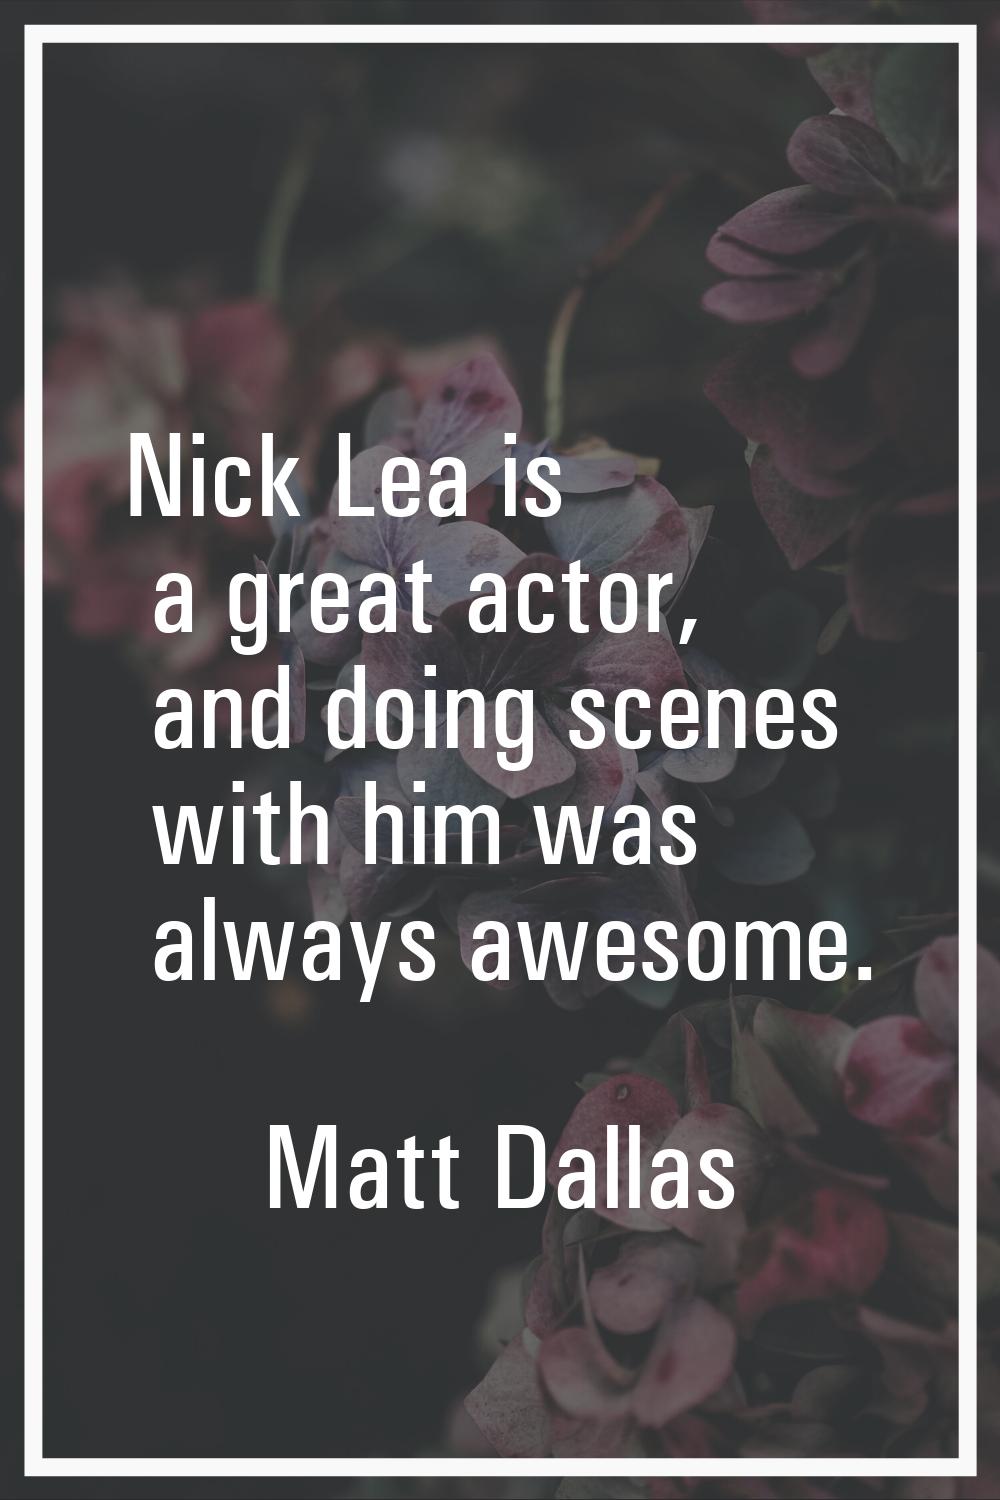 Nick Lea is a great actor, and doing scenes with him was always awesome.